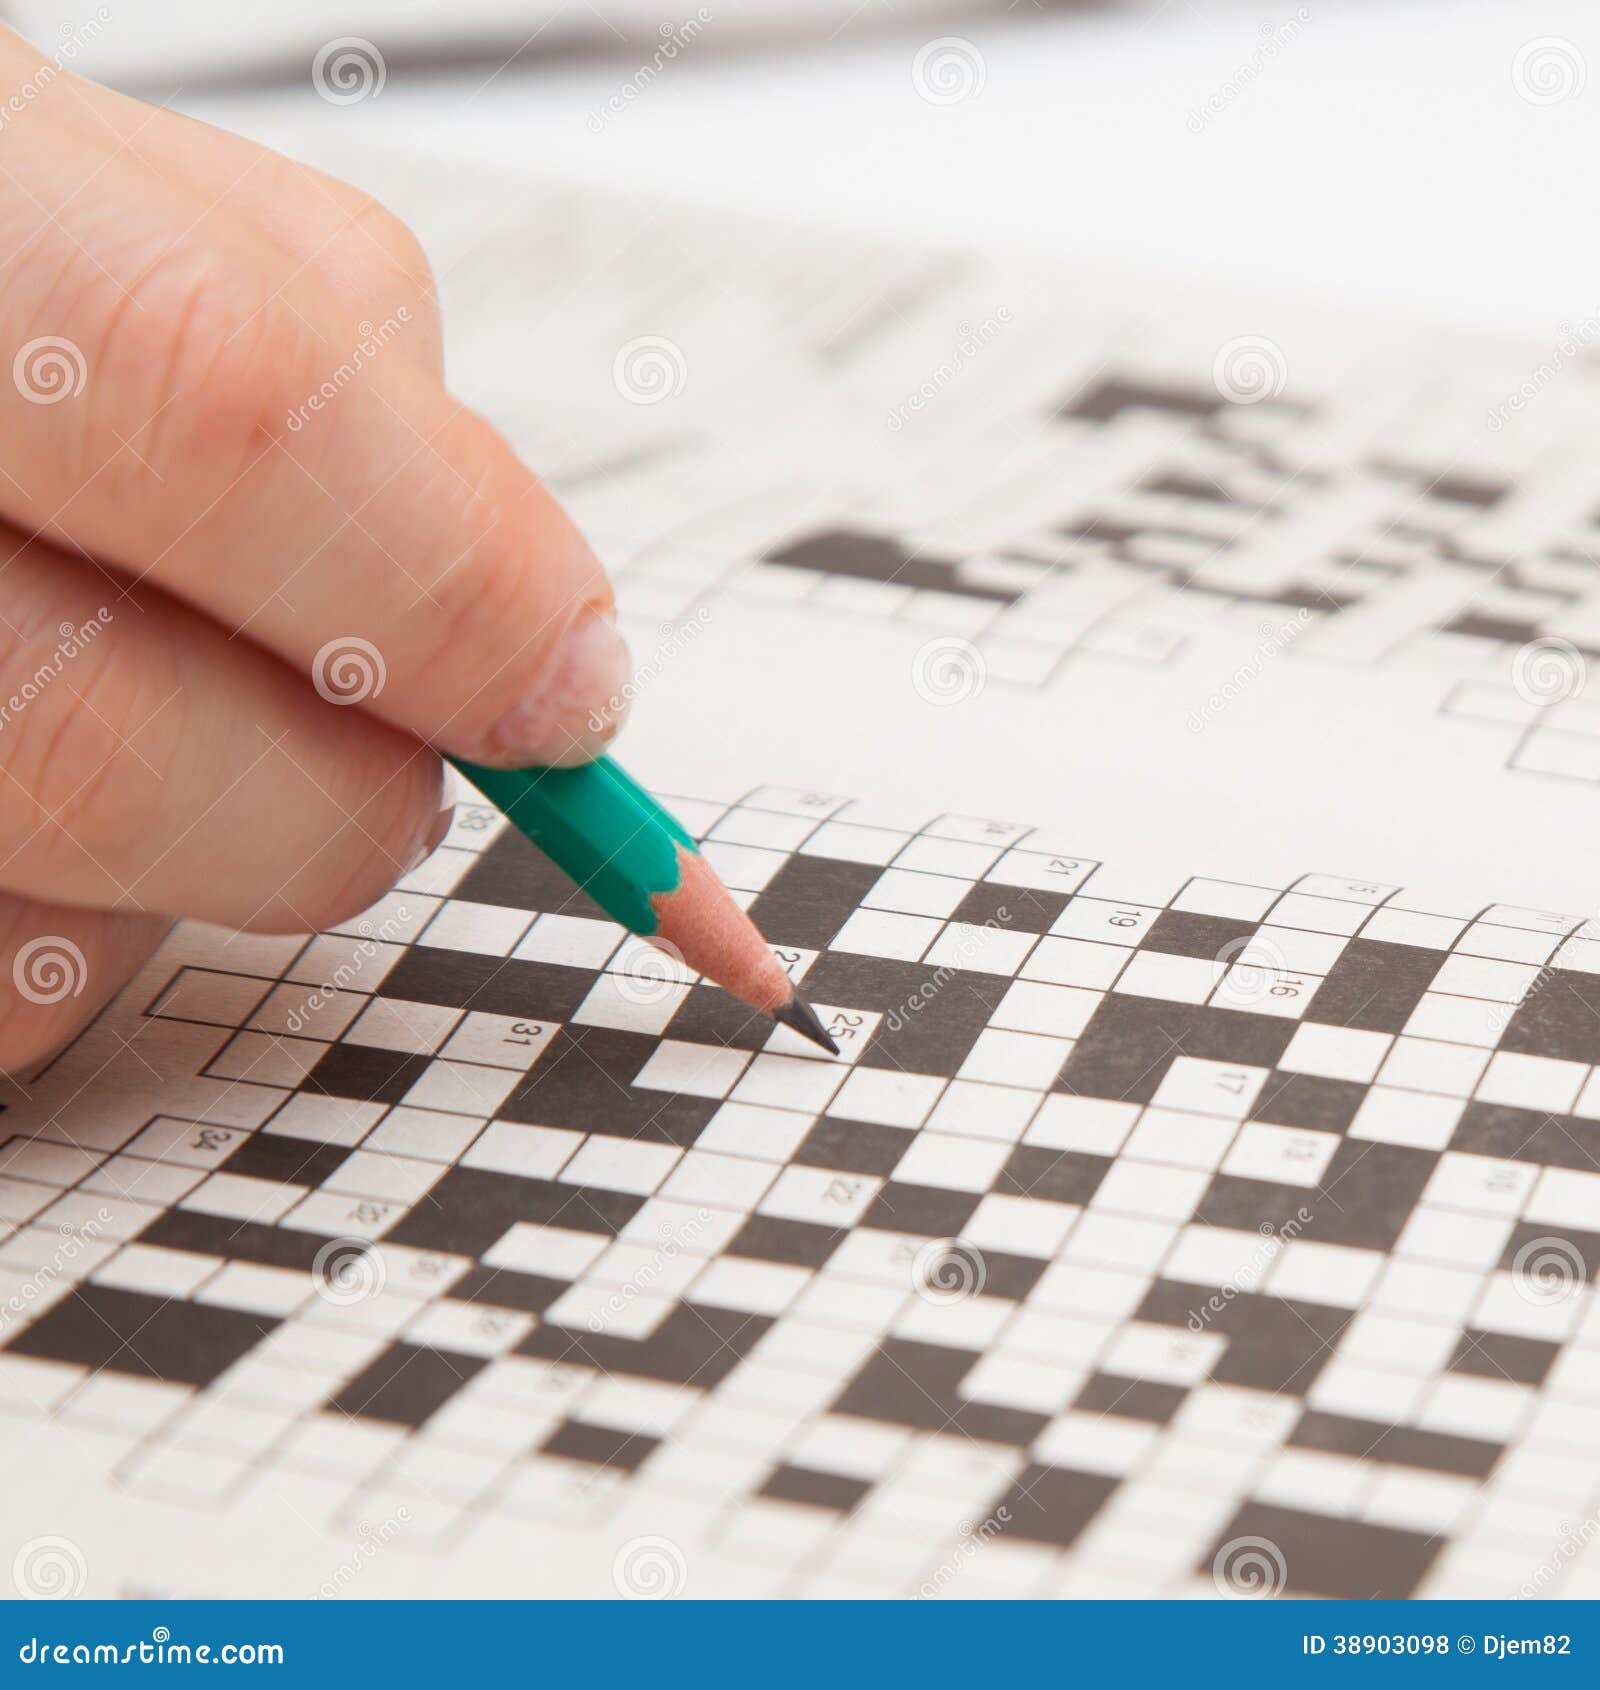 Crossword puzzle close up stock photo Image of concept 38903098